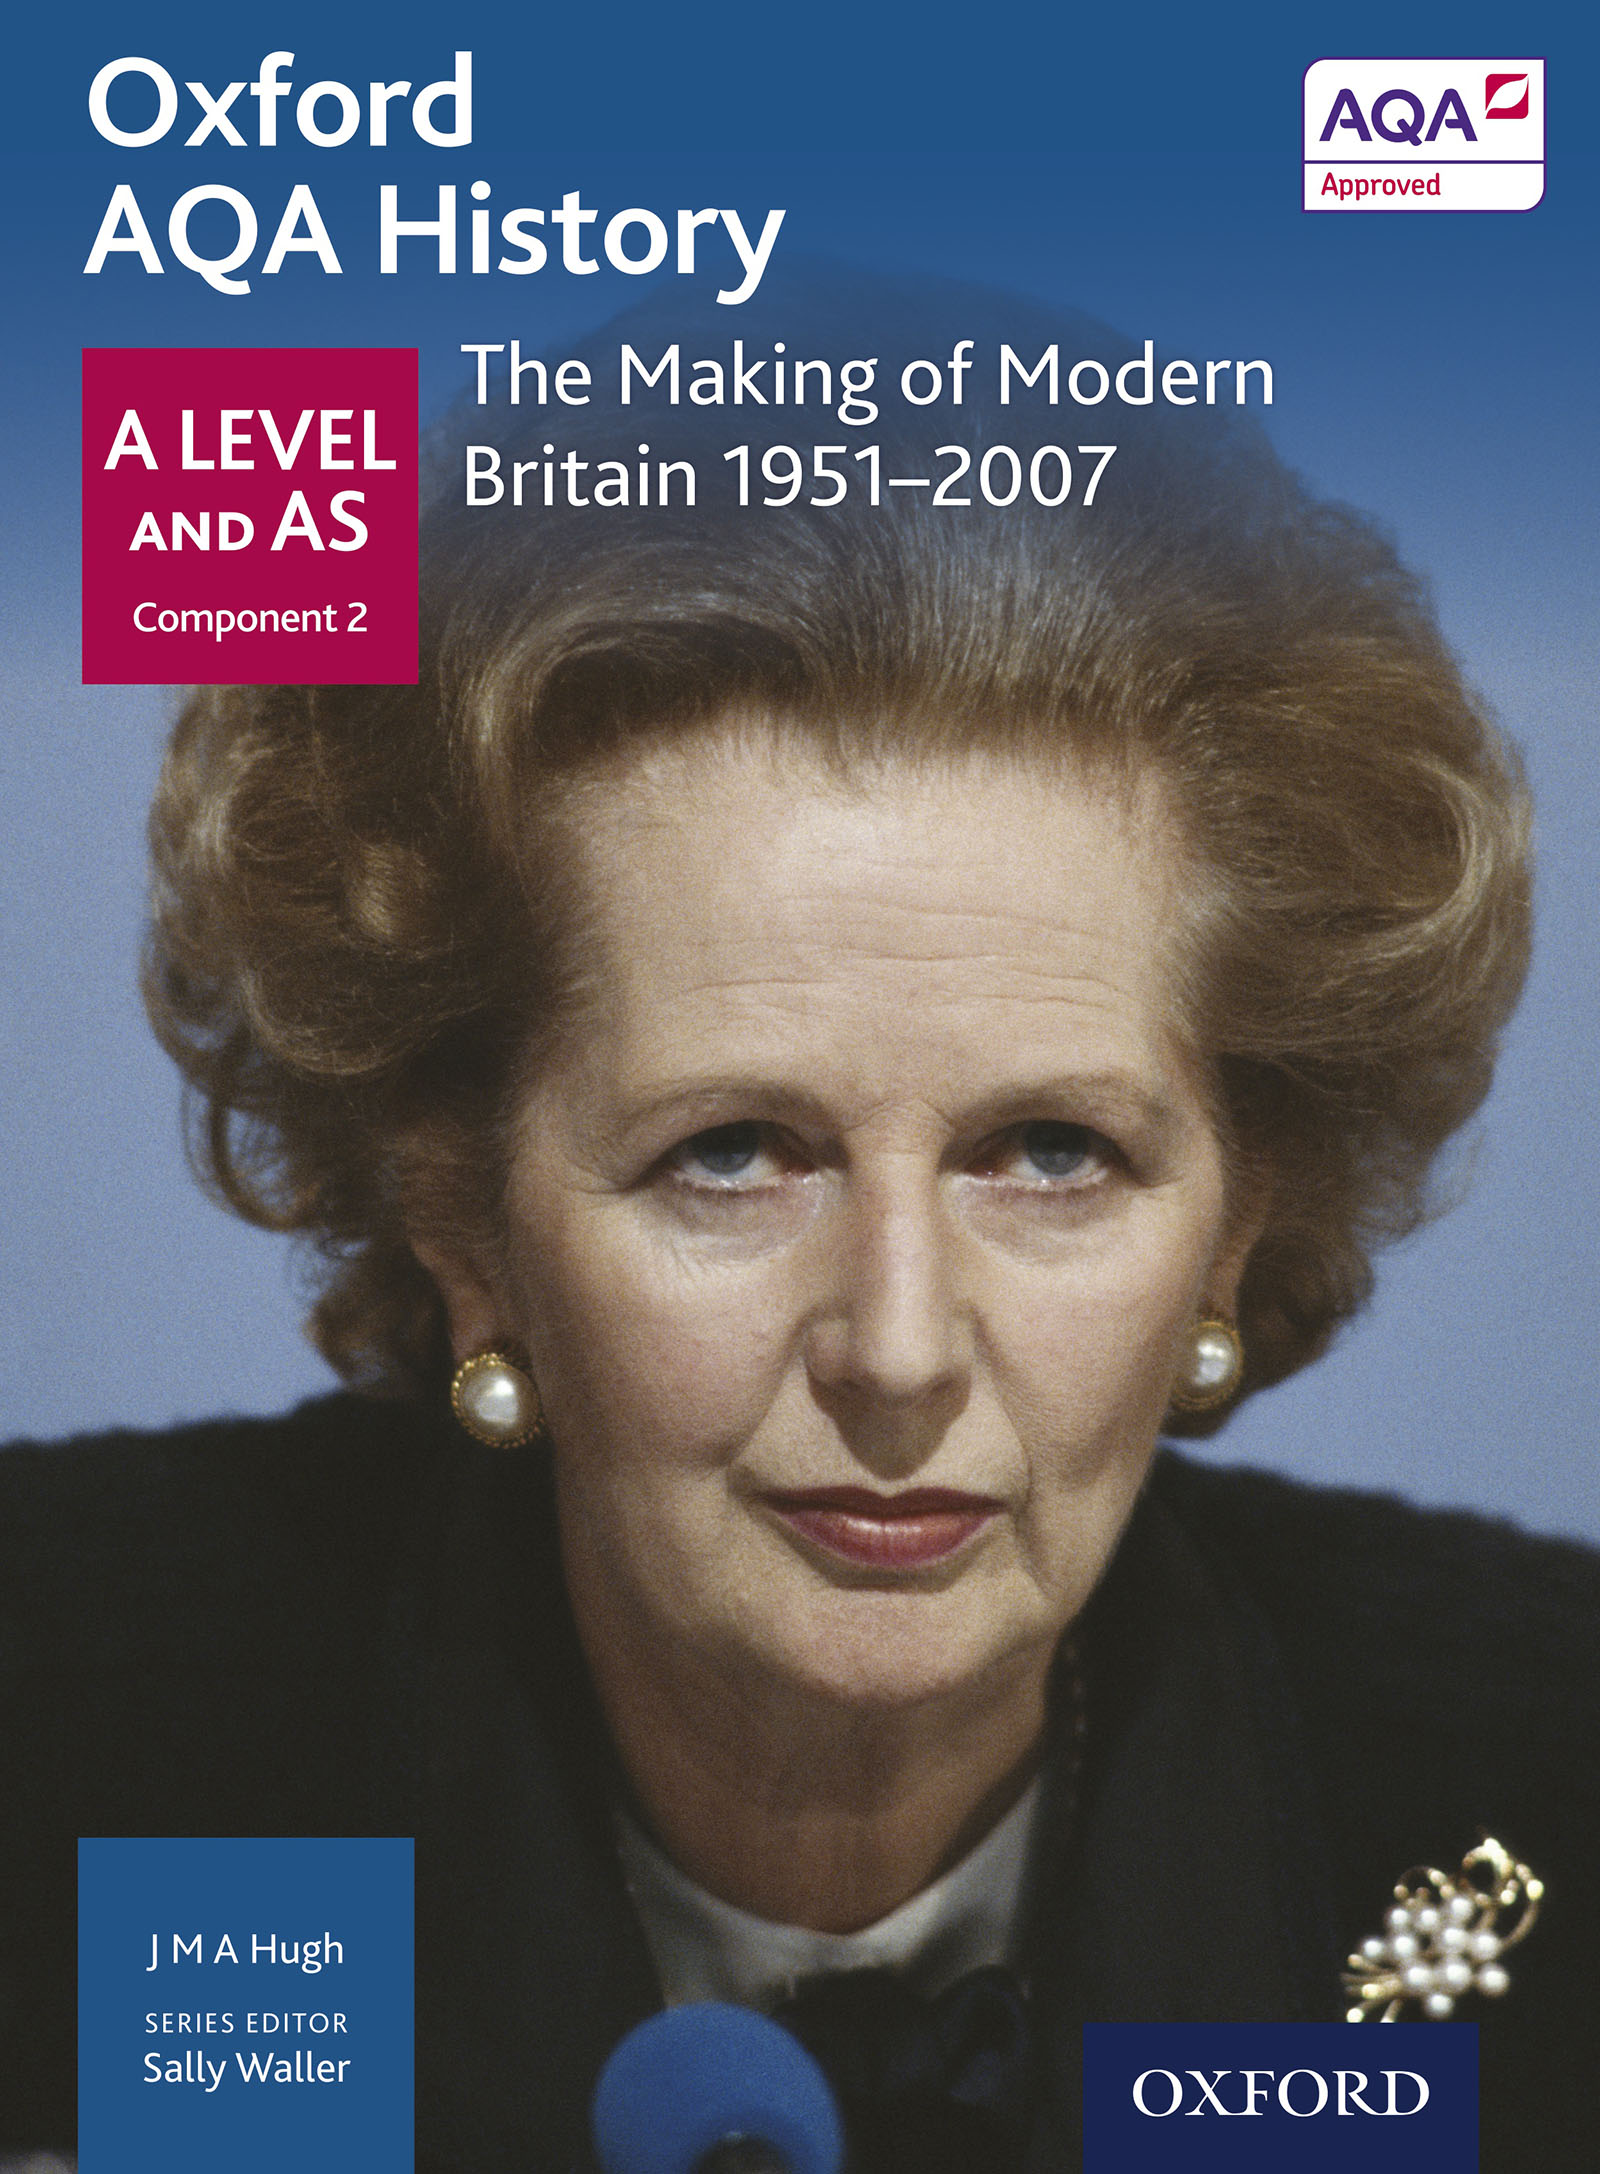 Oxford AQA History: A Level and AS Component 2: The Making of Modern Britain 1951-2006